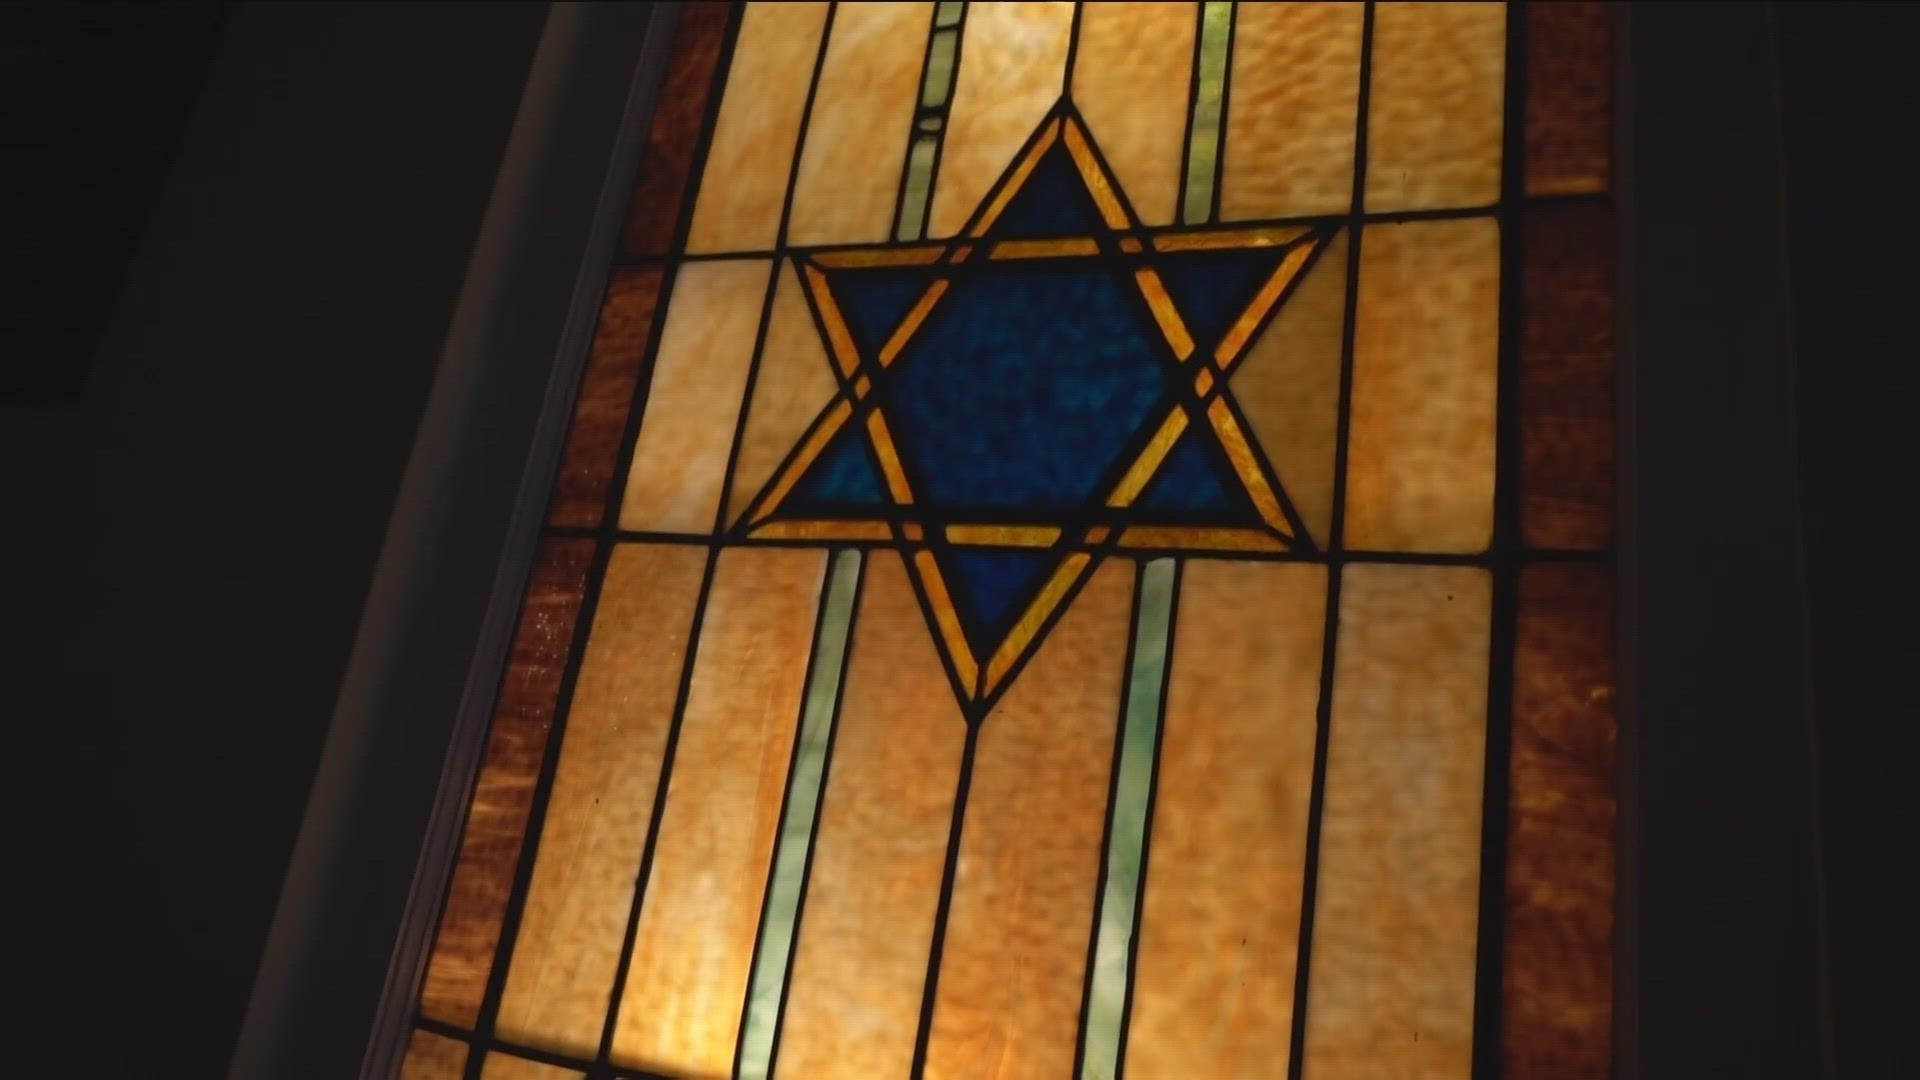 Congregation Beth Israel isn't finished rebuilding, but members of the synagogue say they won't let hate win.